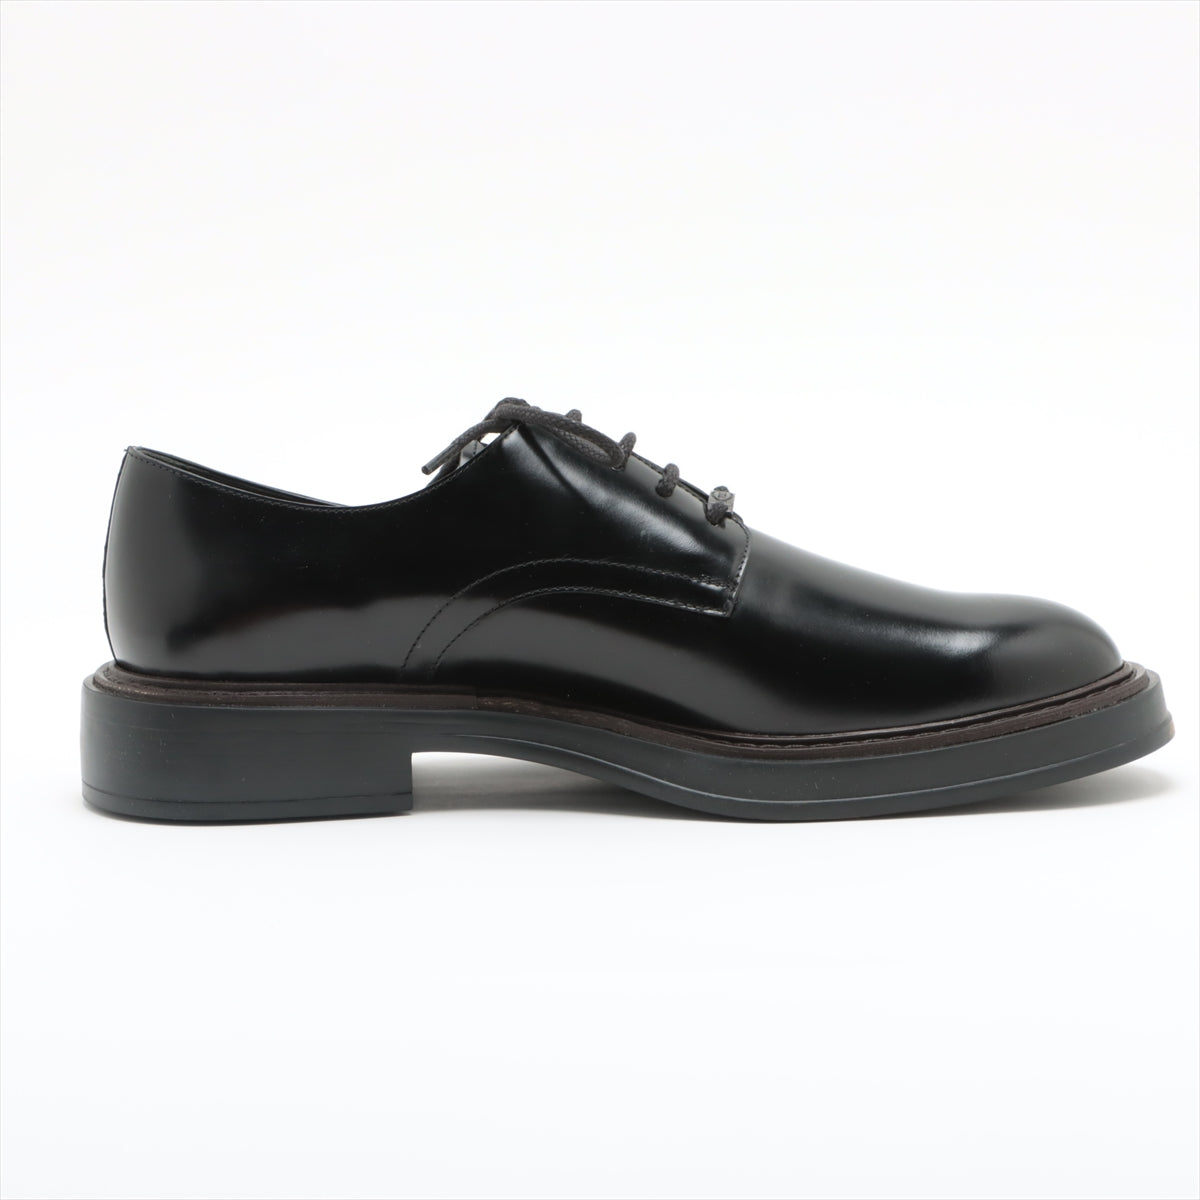 Tod's Leather Leather shoes 10 Men's Black DERBY PASSAL